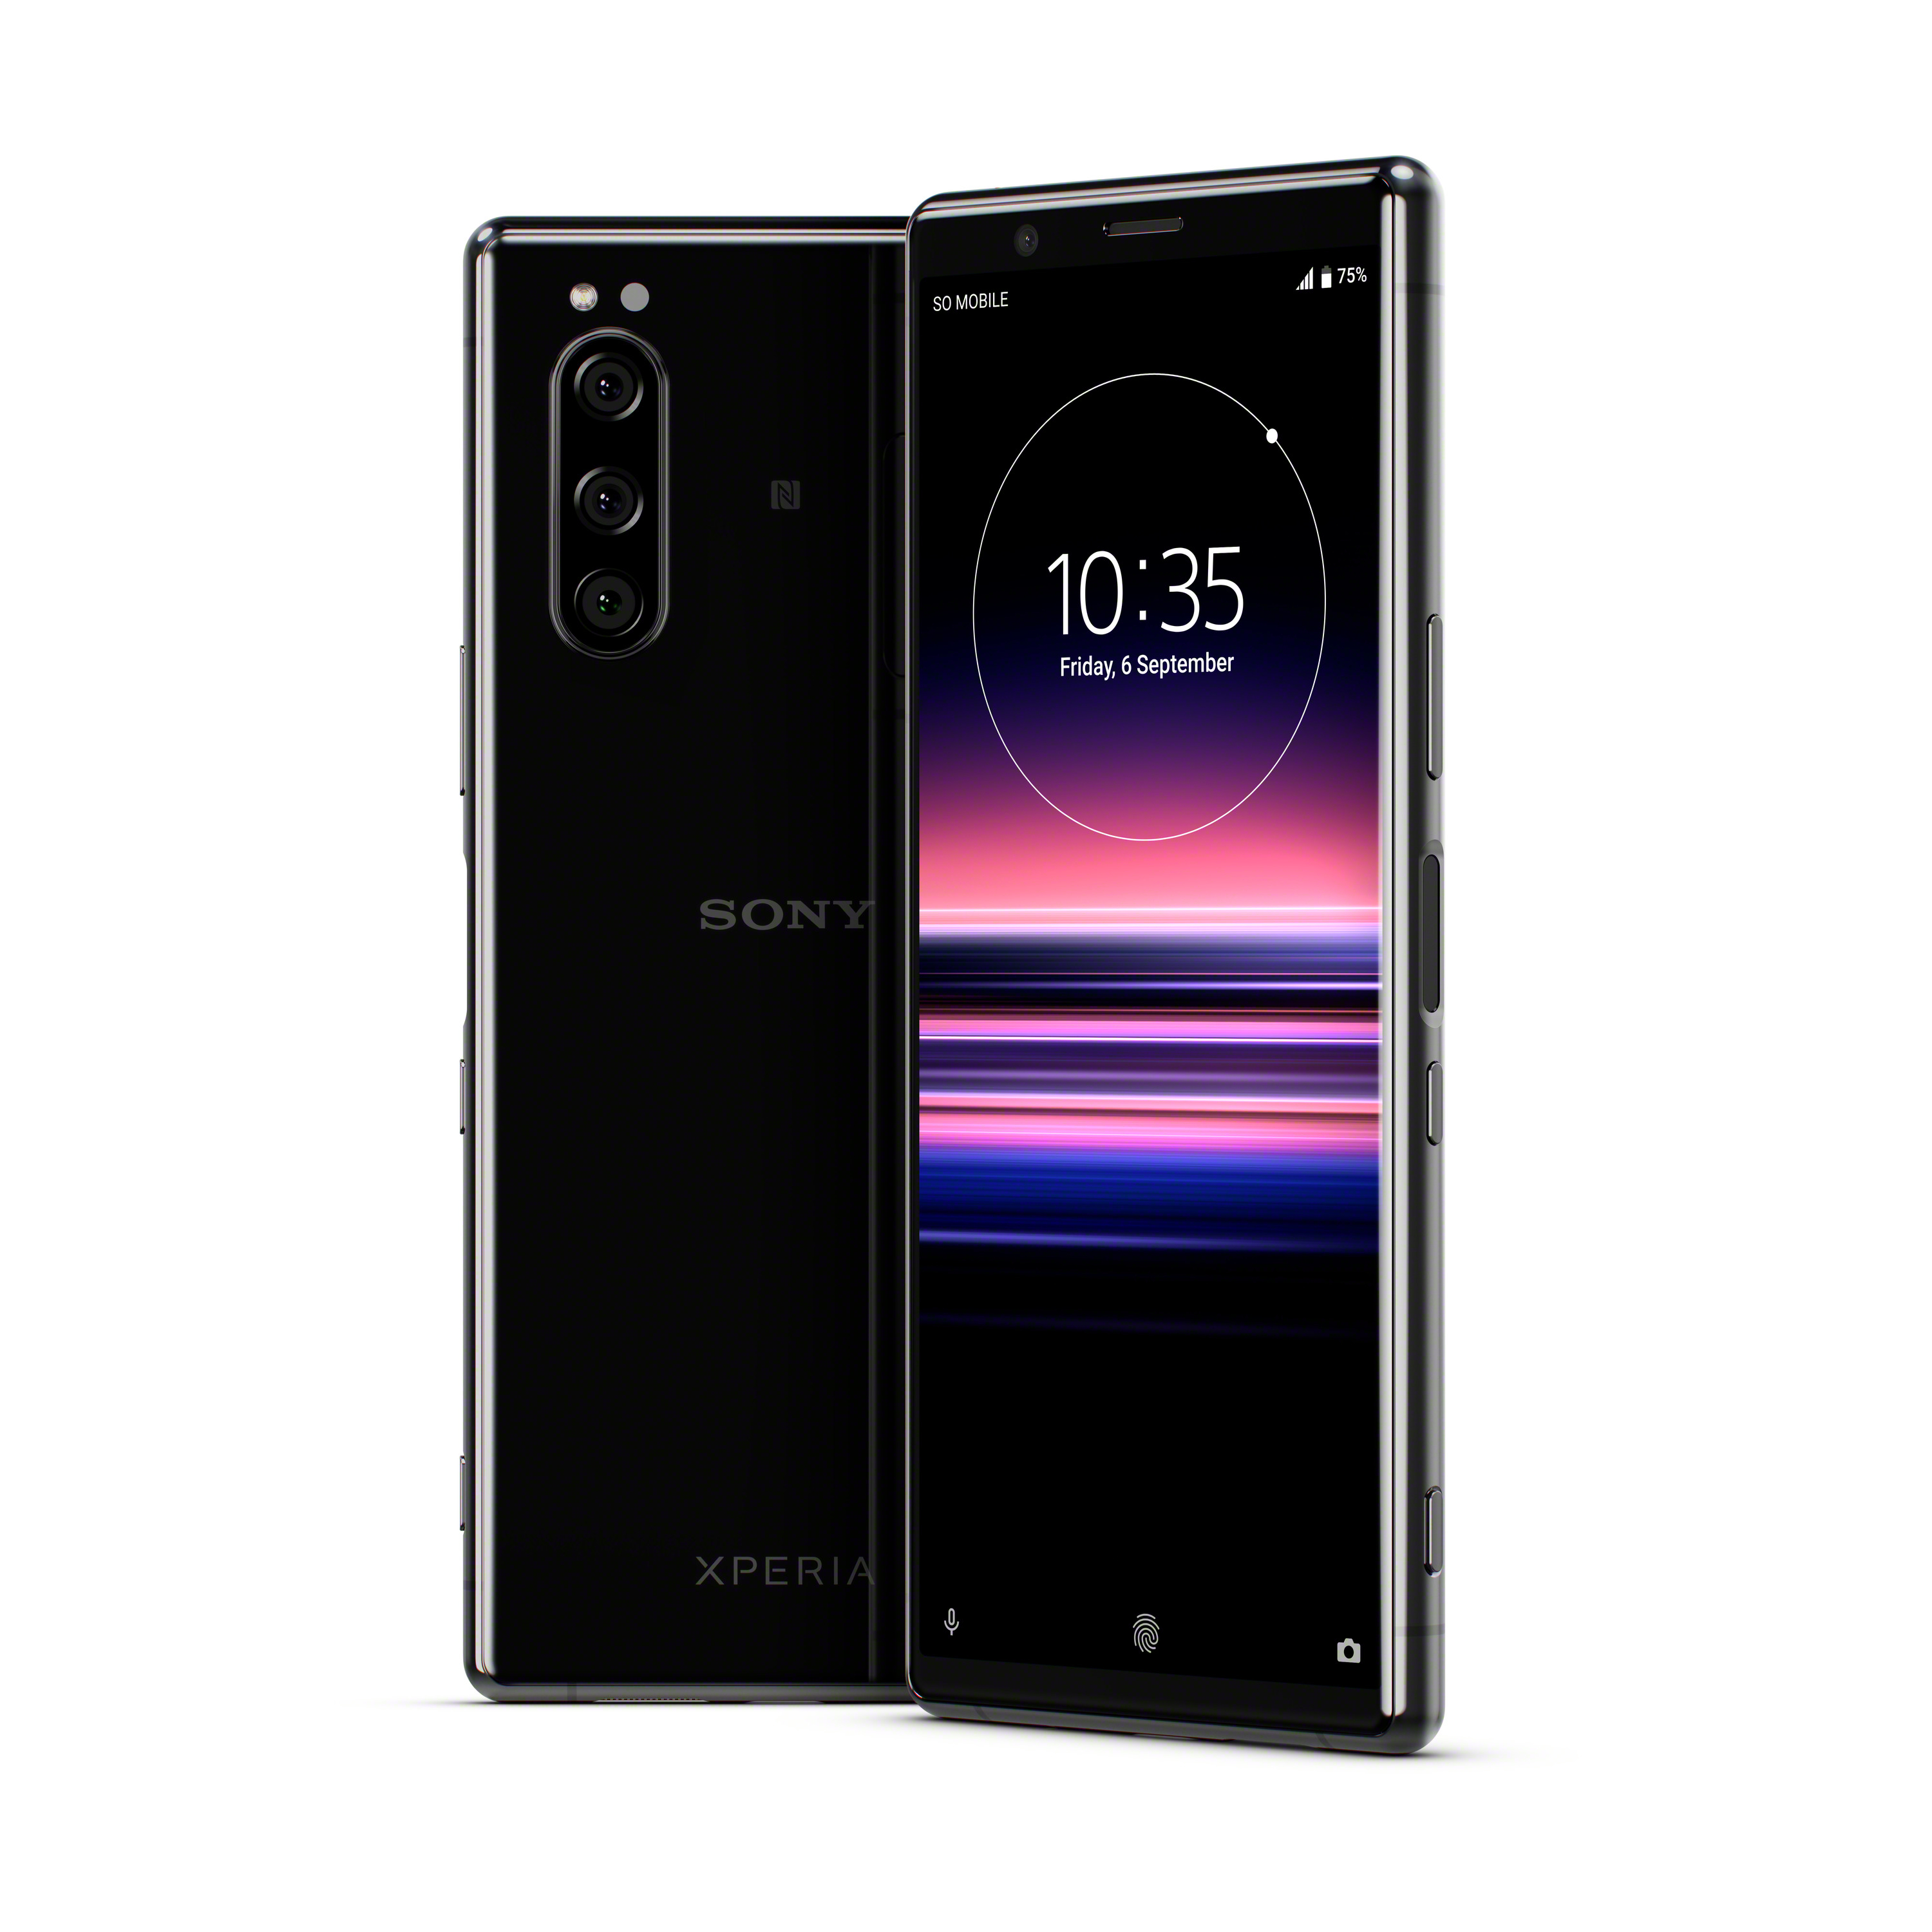 New Sony Xperia 5 Android Smartphone Comes Loaded with Camera Tech